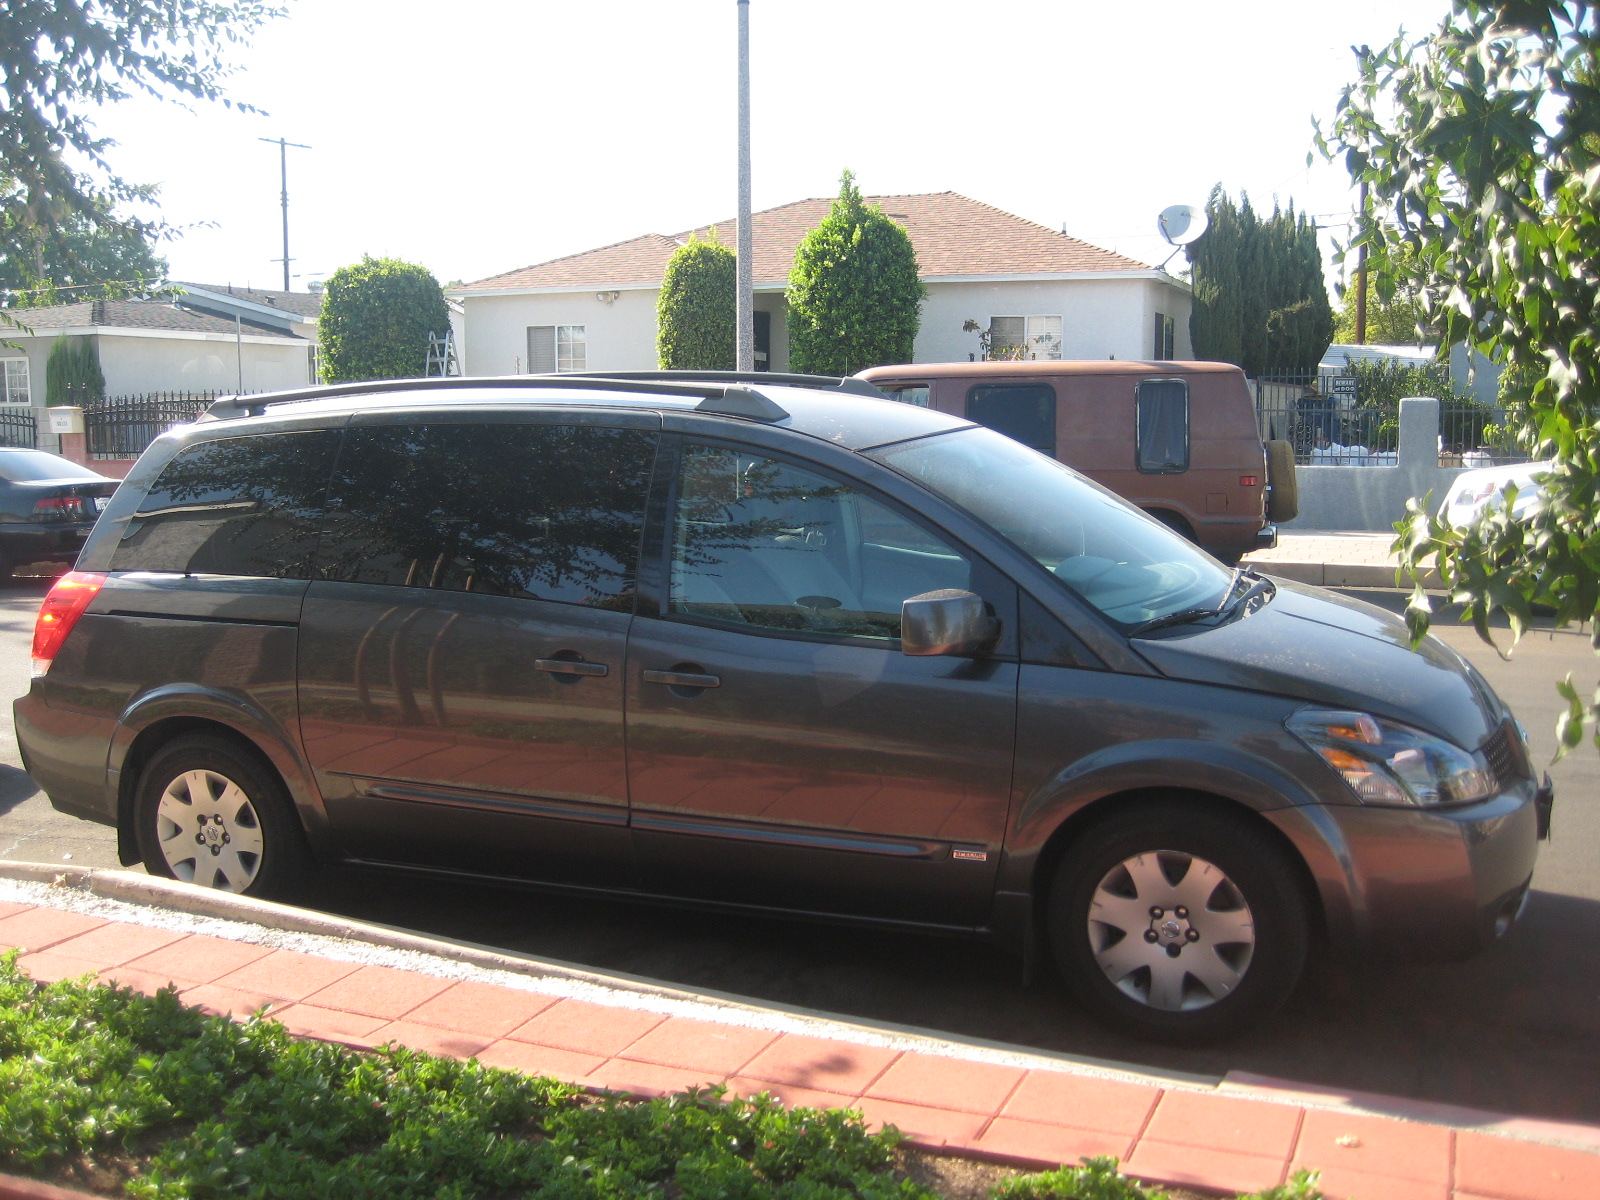 Mpg for 2006 nissan quest #2